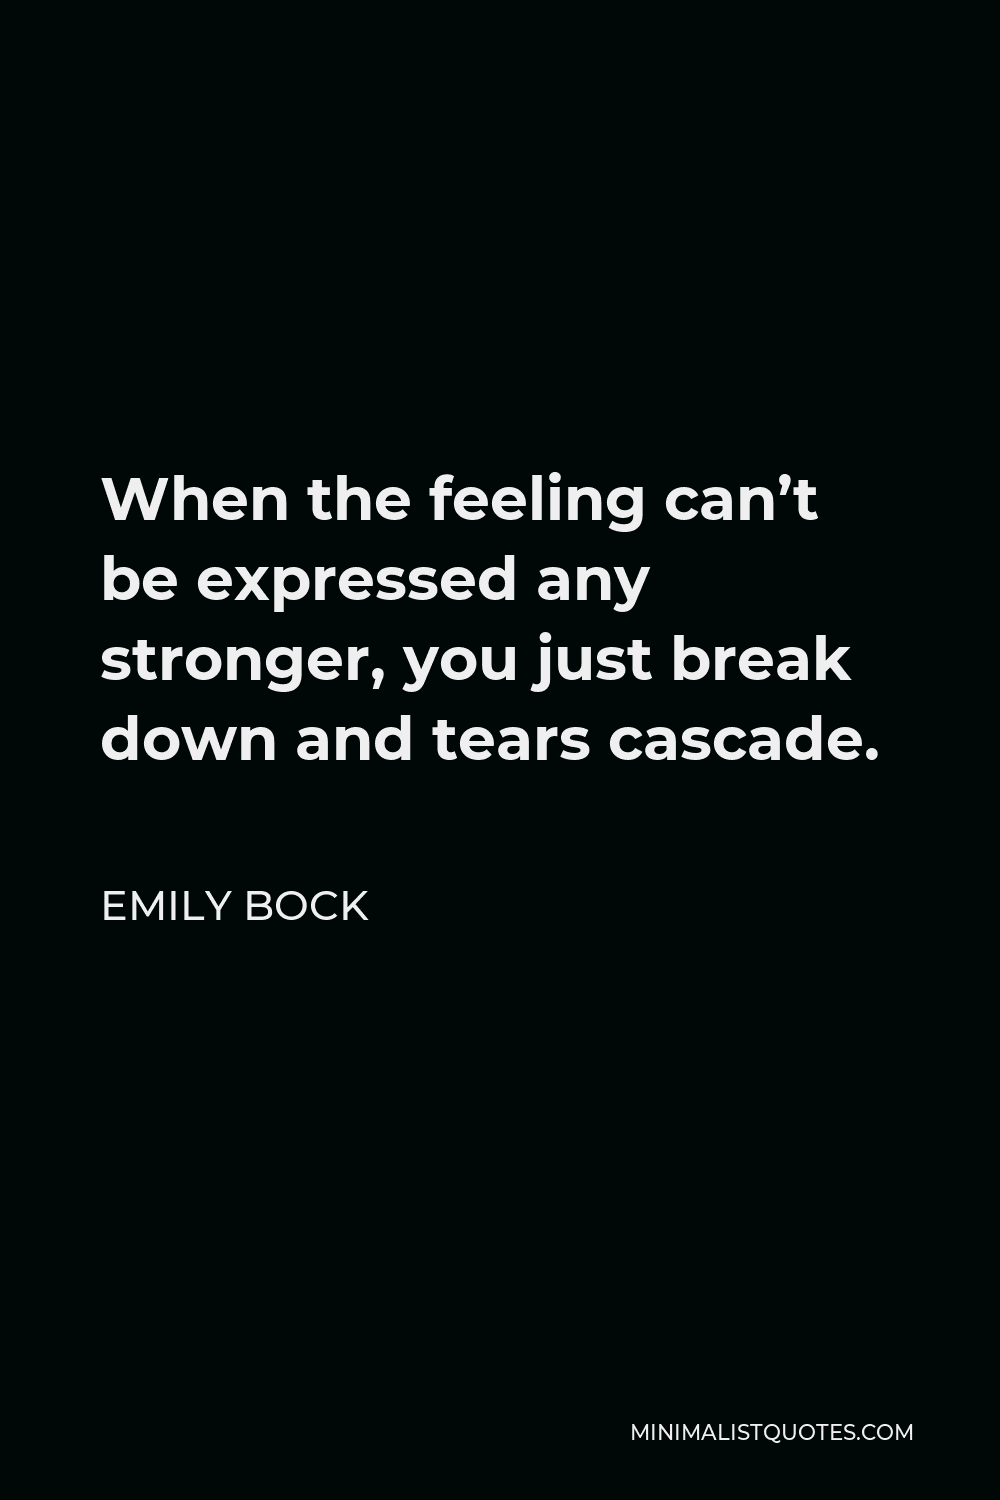 Emily Bock Quote - When the feeling can’t be expressed any stronger, you just break down and tears cascade.